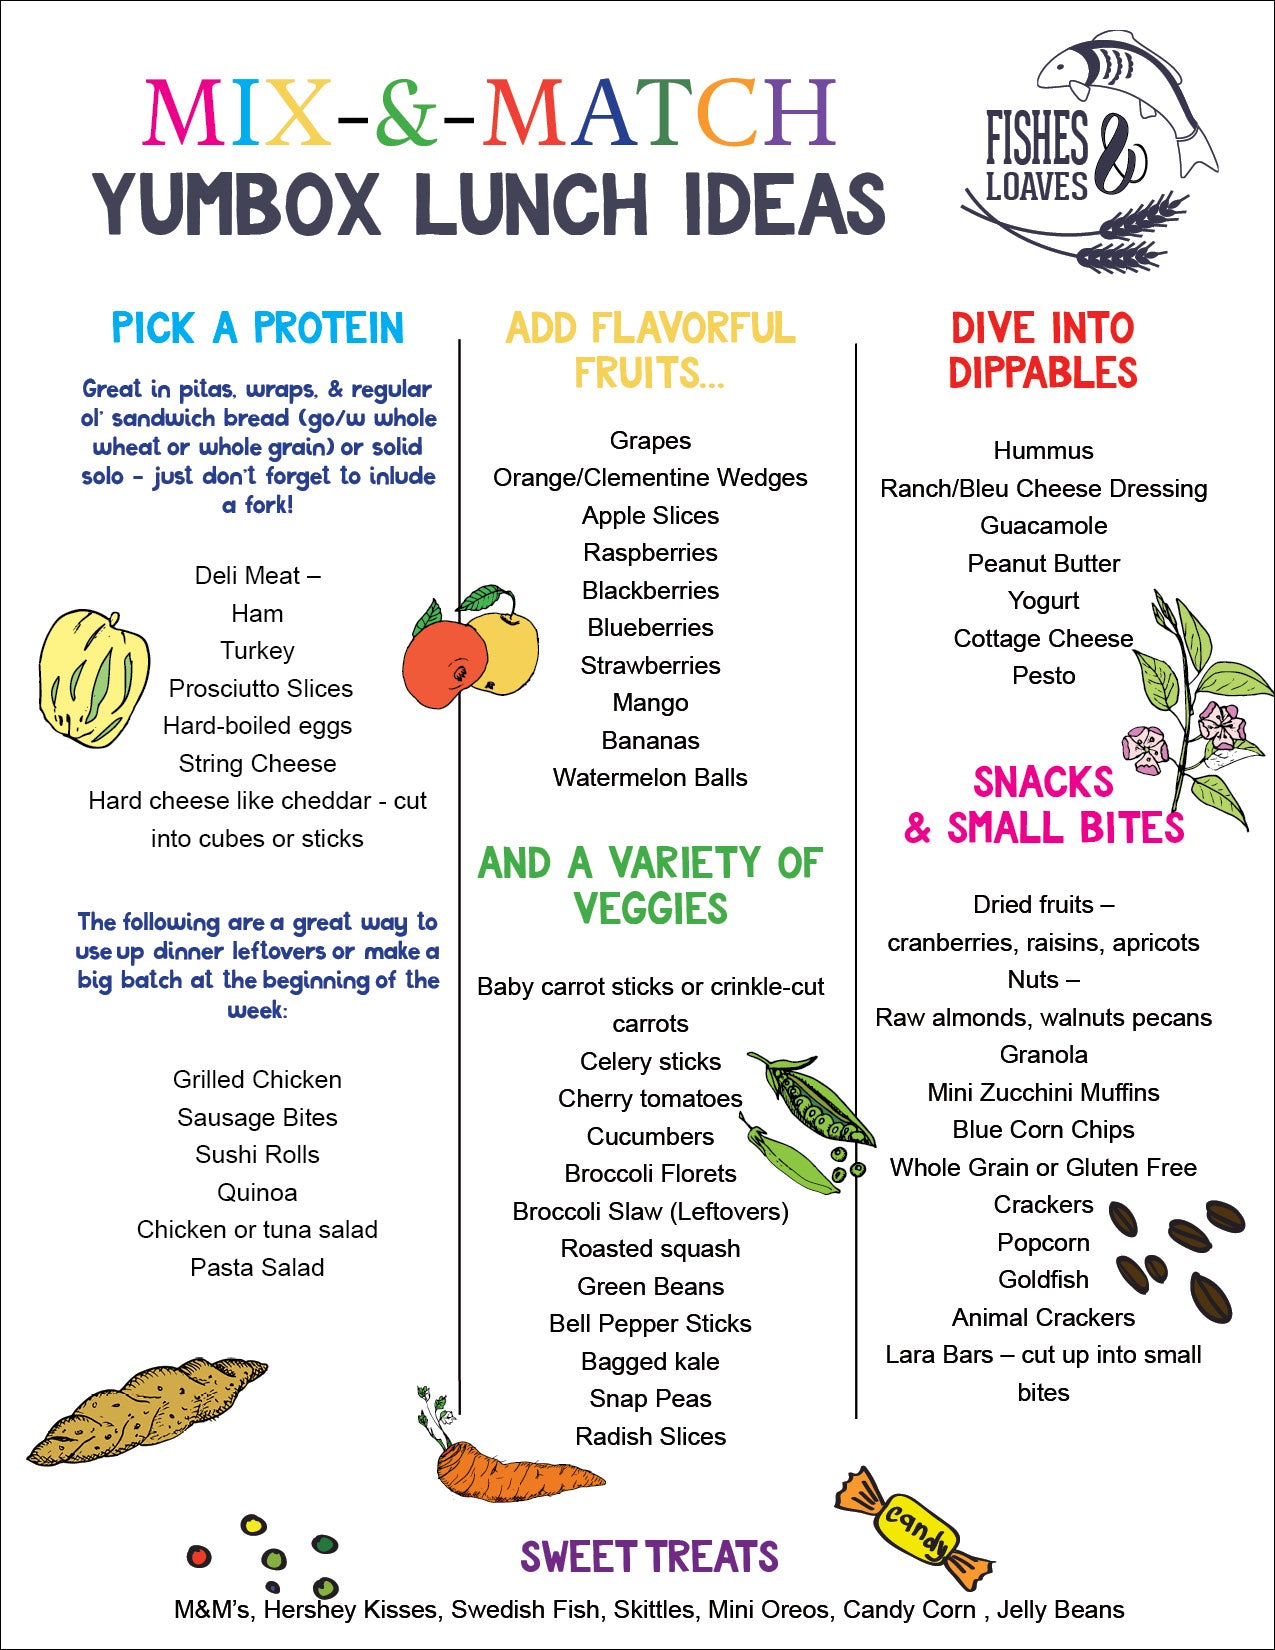 Mix-and-match Yumbox lunch ideas for kids - Healthy Kids lunchs